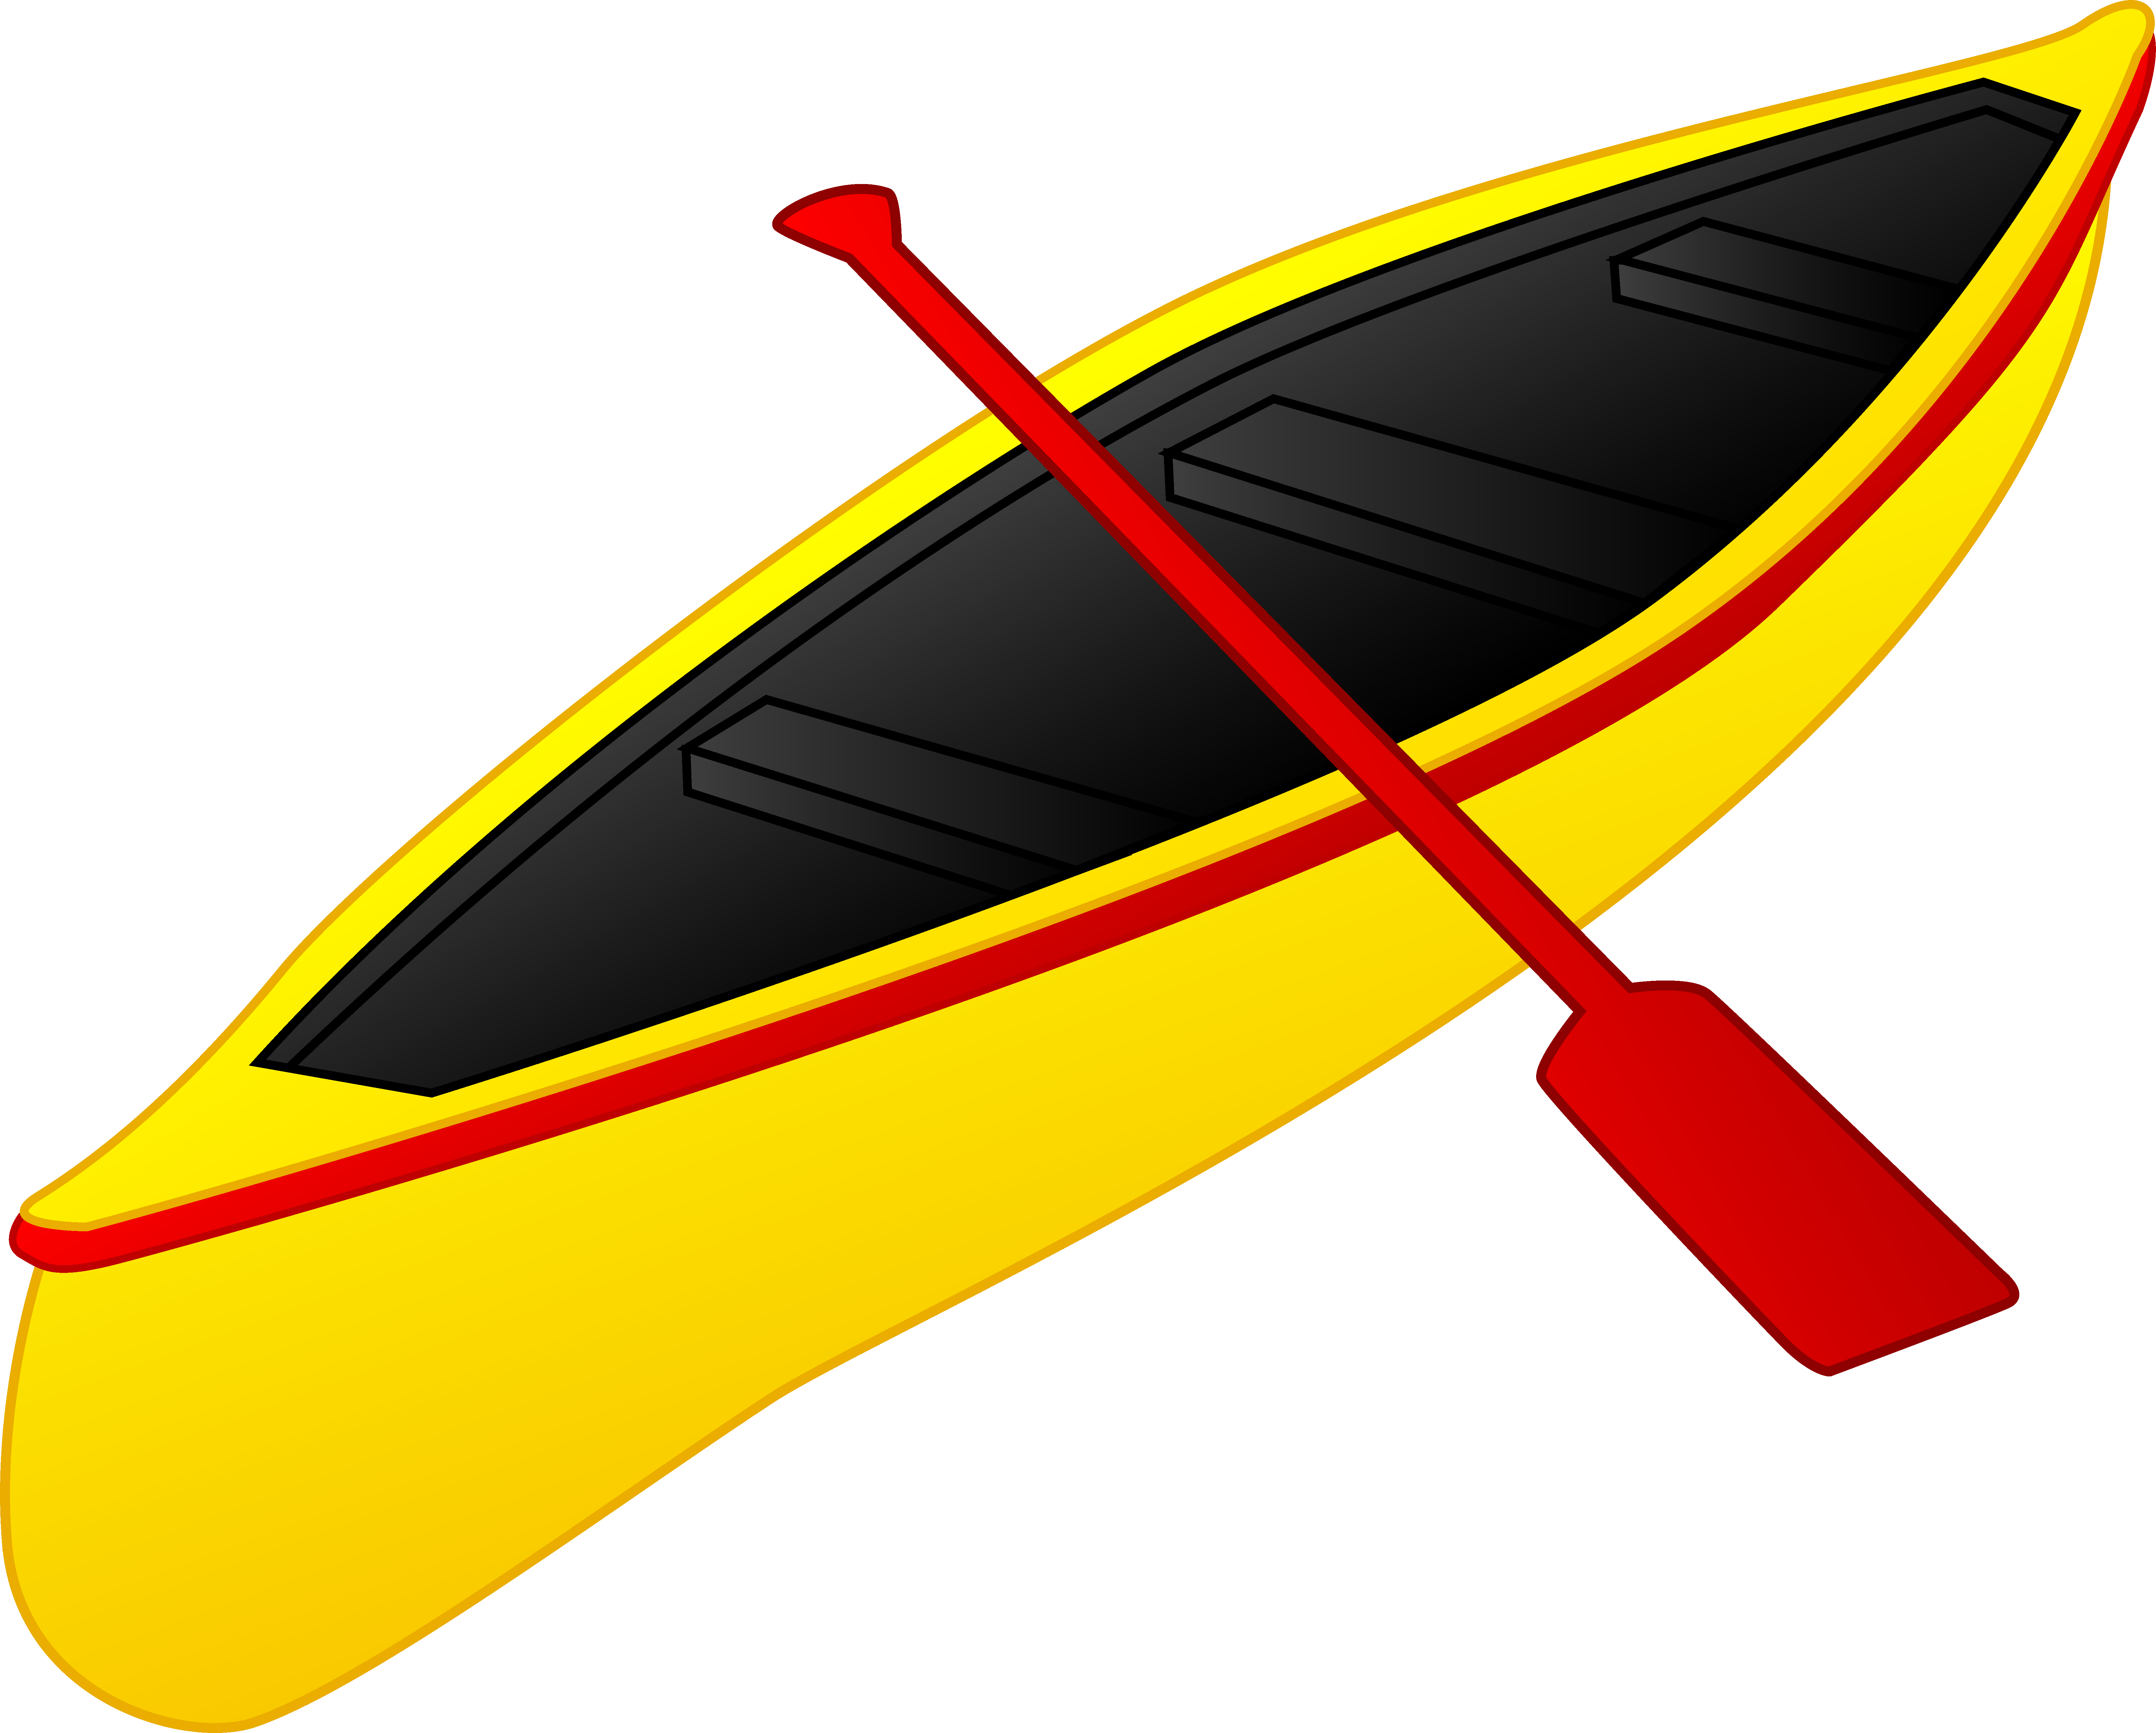 Yellow boat with a red paddle Free Clipart free image